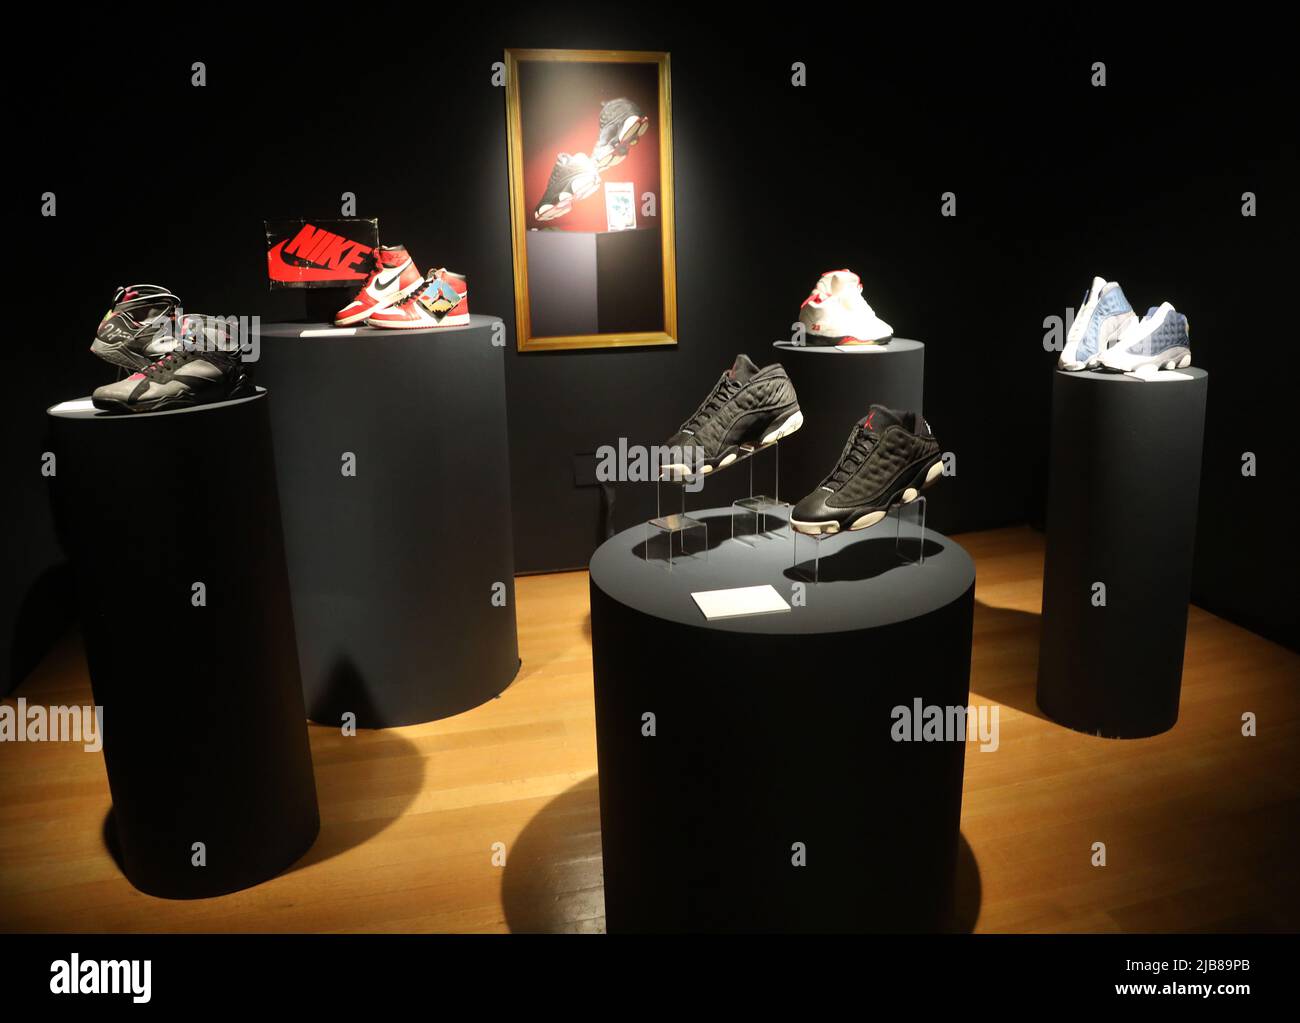 Christie's Offers the Most Exquisite Michael Jordan Memorabilia in the Six  Rings - Legacy of the Goat Auction